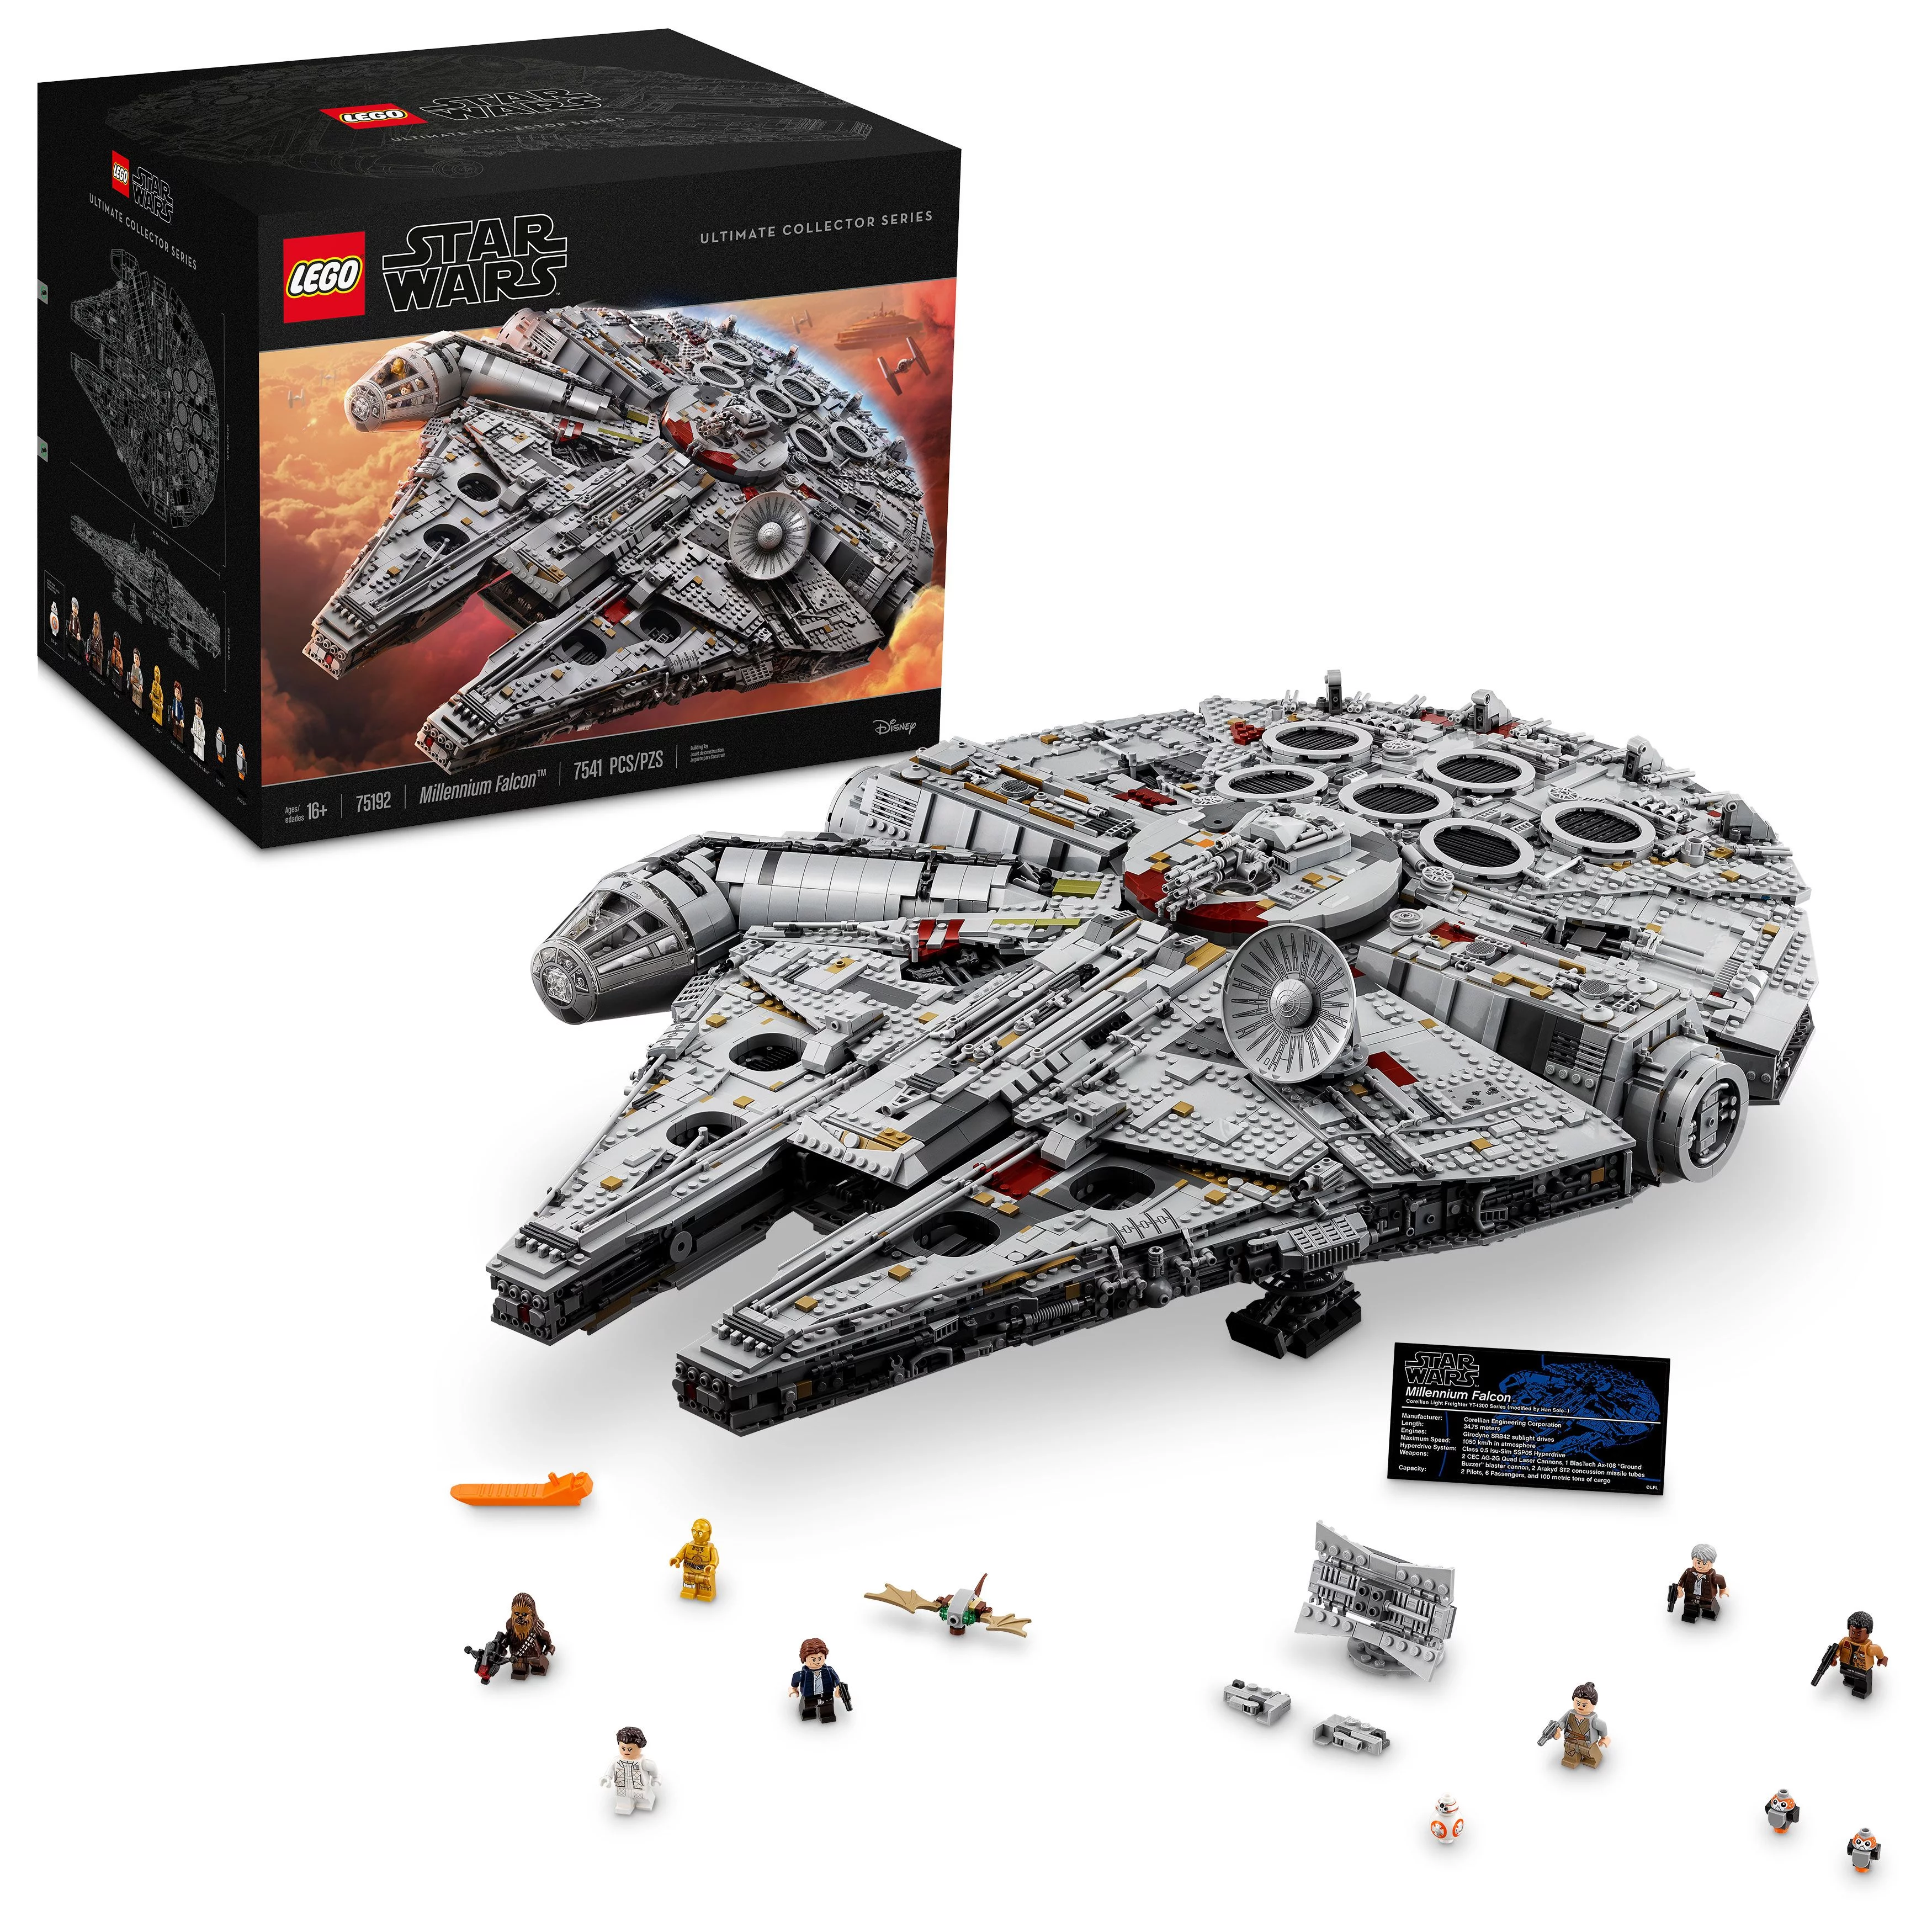 LEGO Star Wars Ultimate Millennium Falcon 75192 Expert Building Set and Starship Model Kit, Movie Collectible, Featuring Han Solo's Iconic Ship